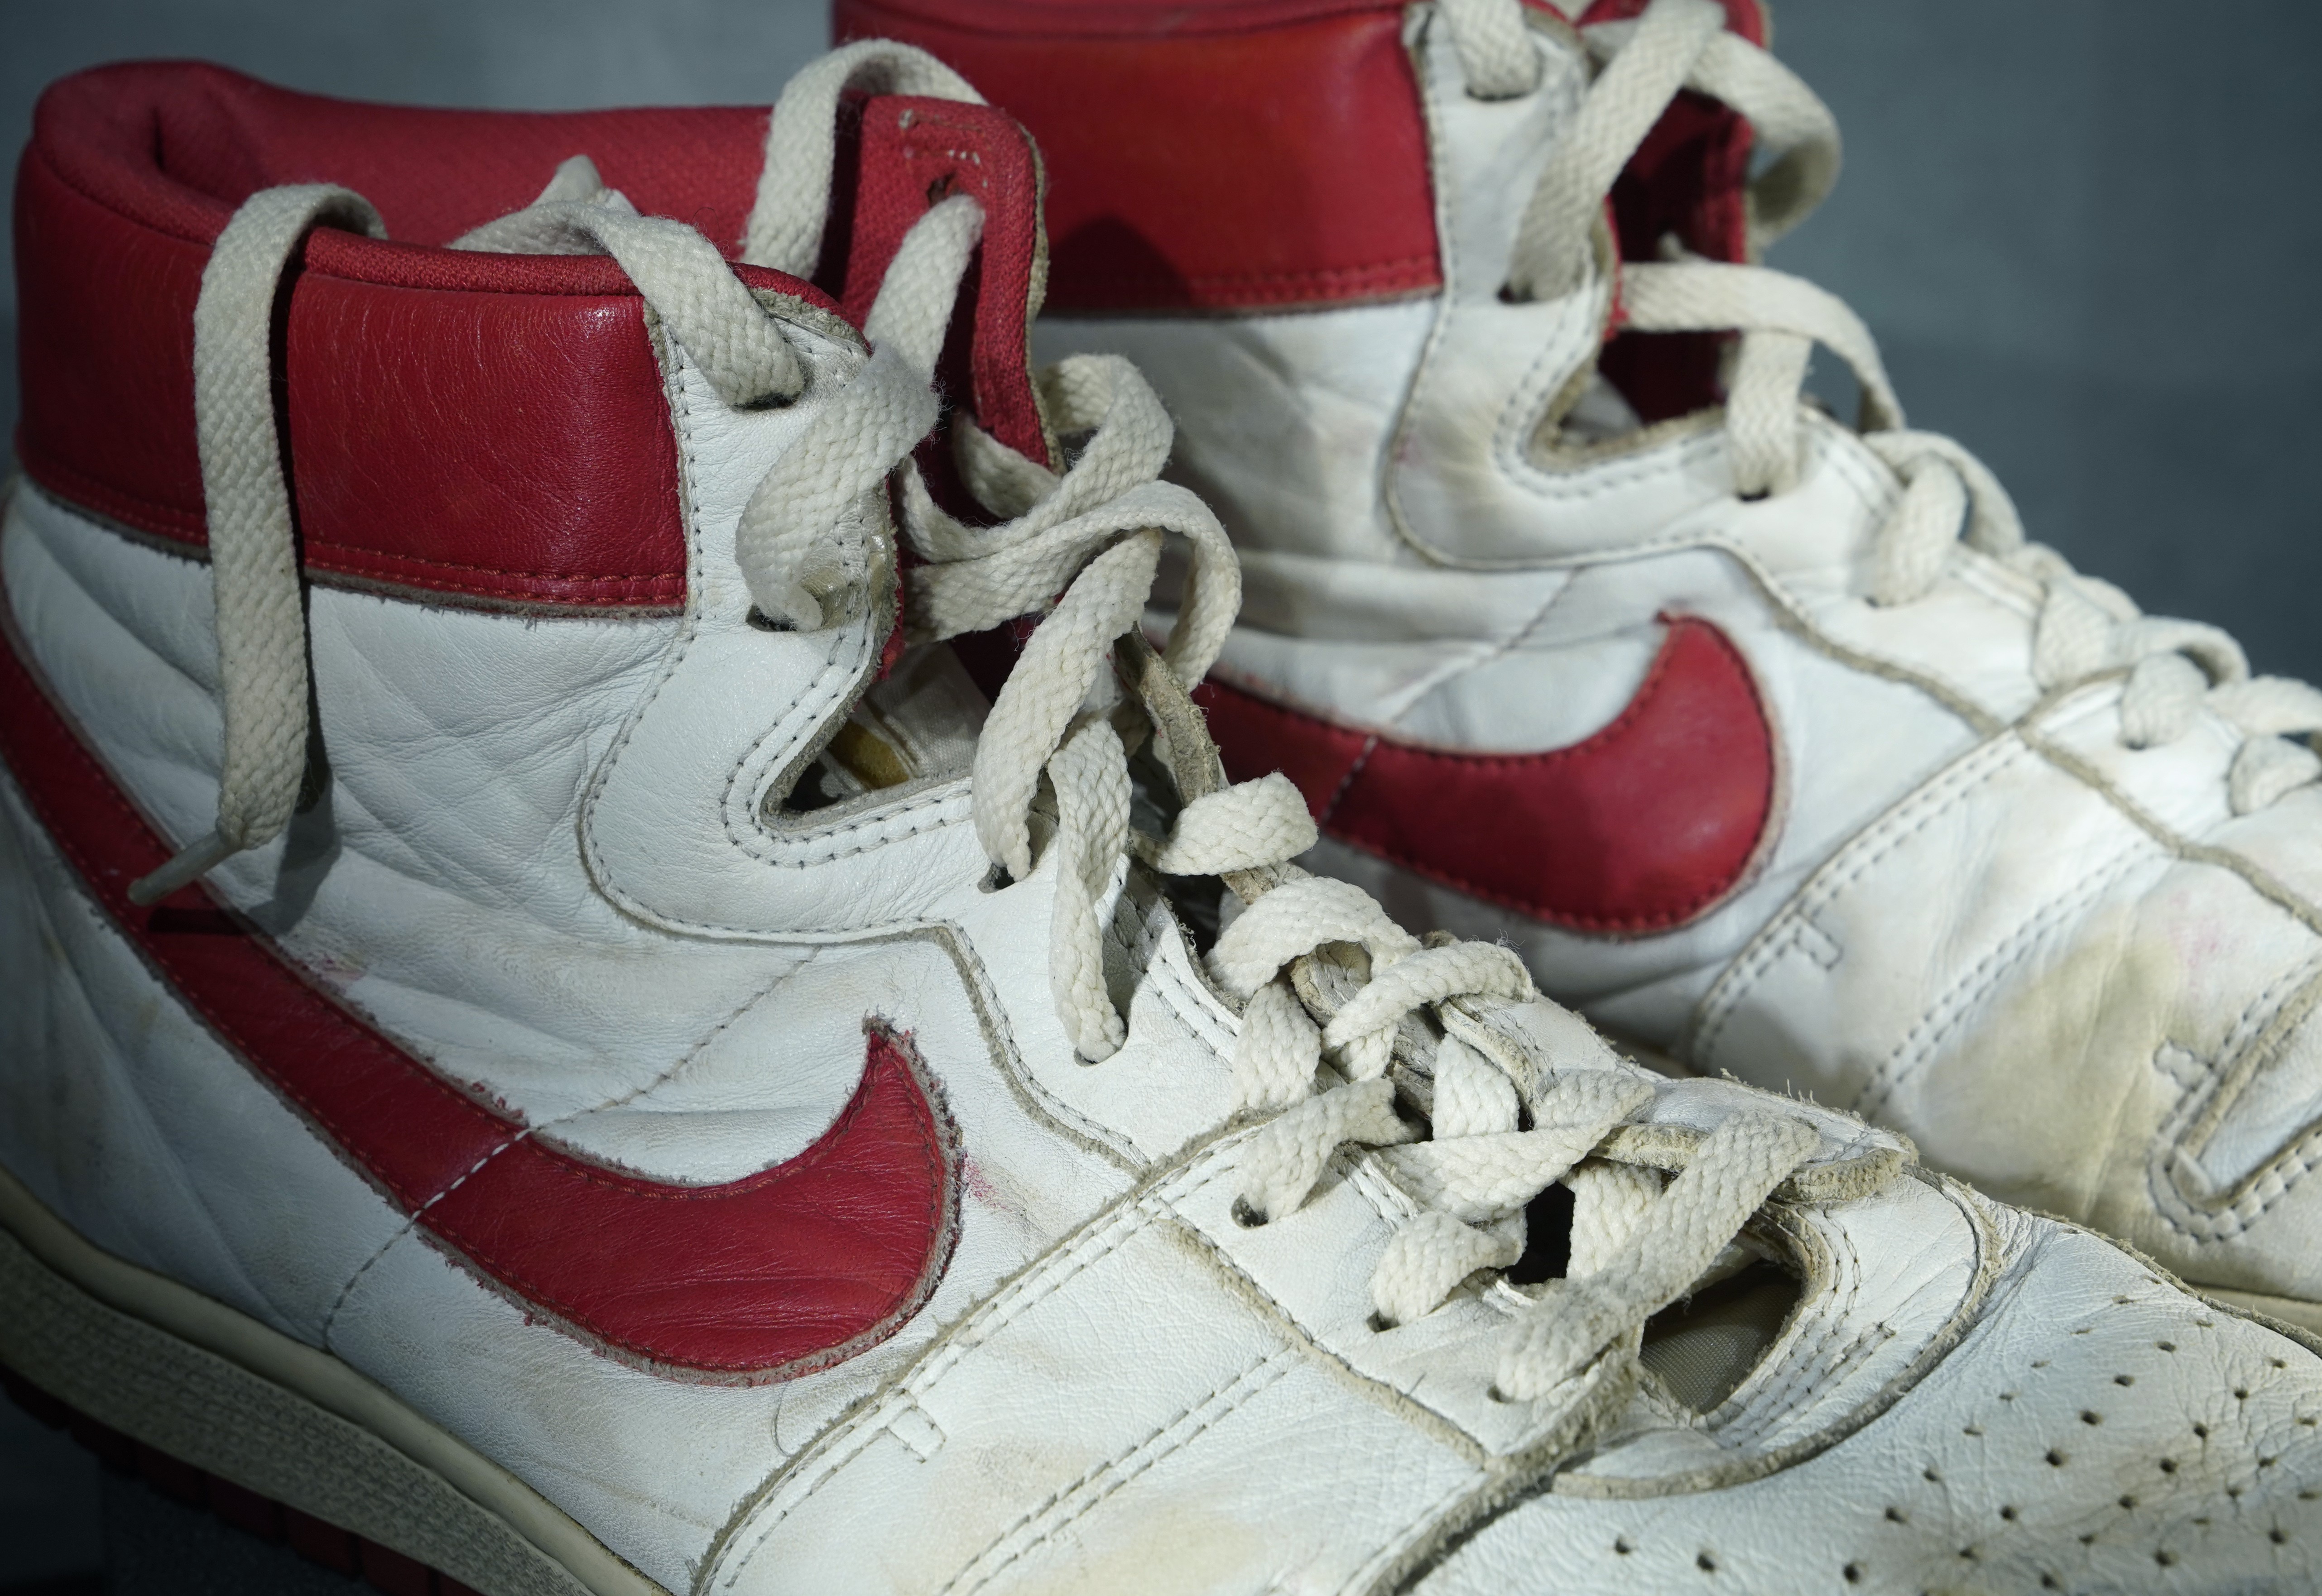 Rare Nike shoes worn by Michael Jordan during rookie season sell at auction  for record $1.47 million - oregonlive.com